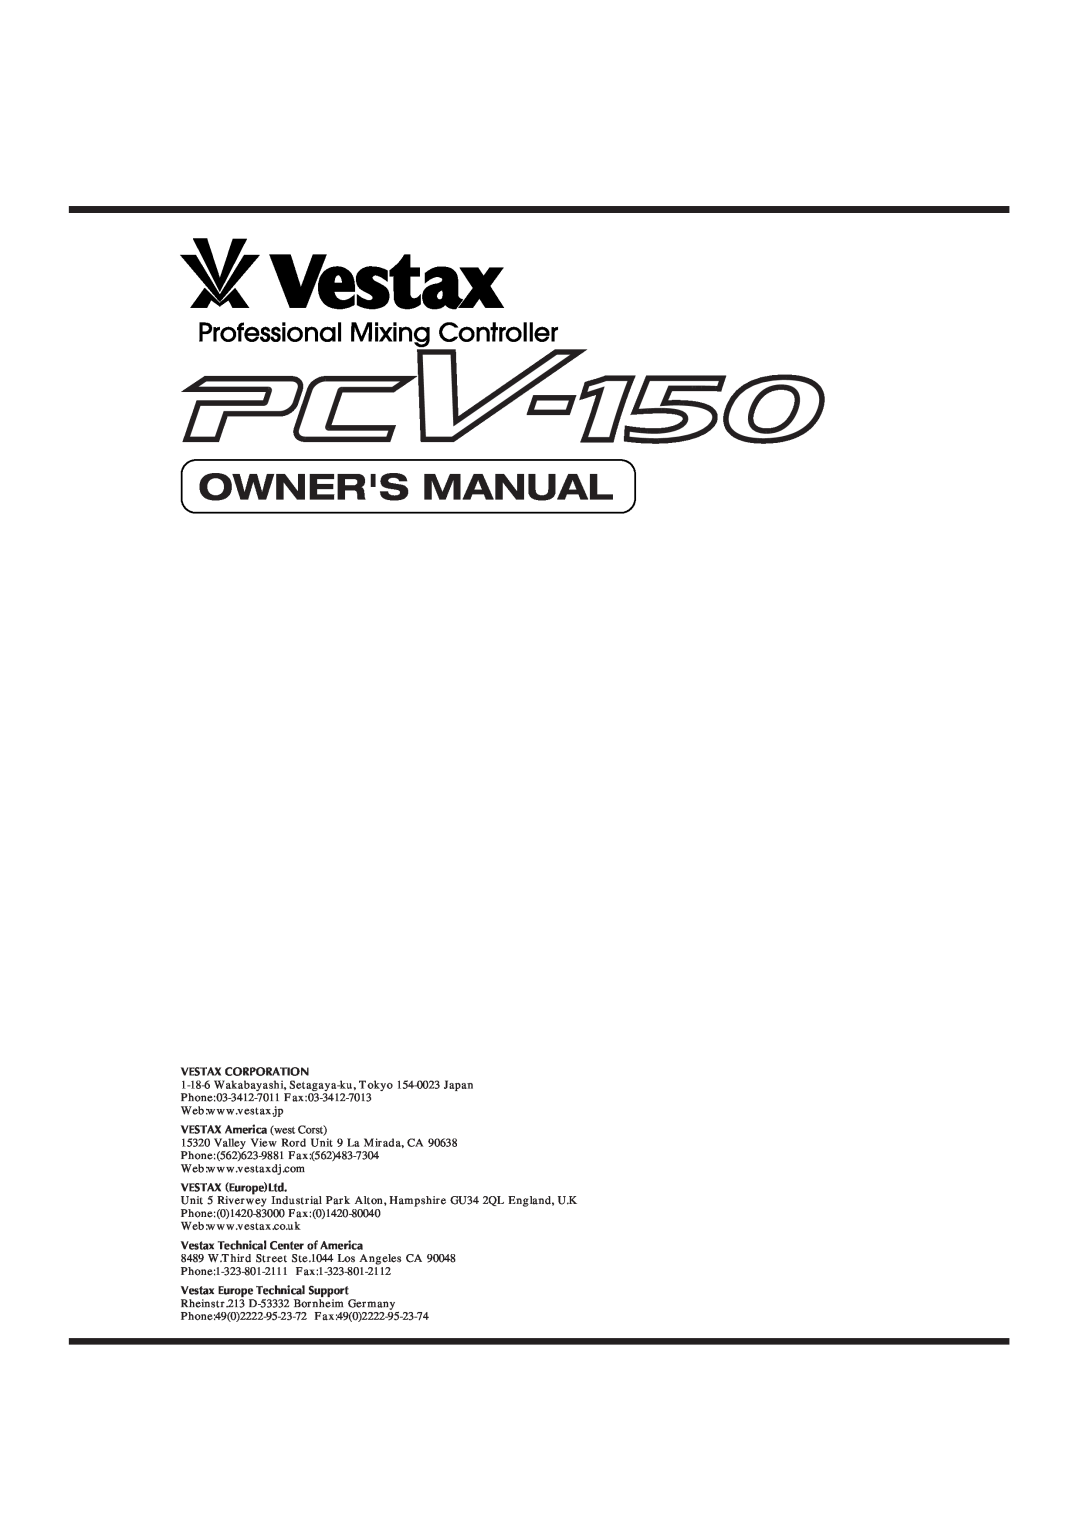 Vestax PCV-150 owner manual Owners Manual, Professional Mixing Controller, Vestax Corporation, VESTAX America west Corst 